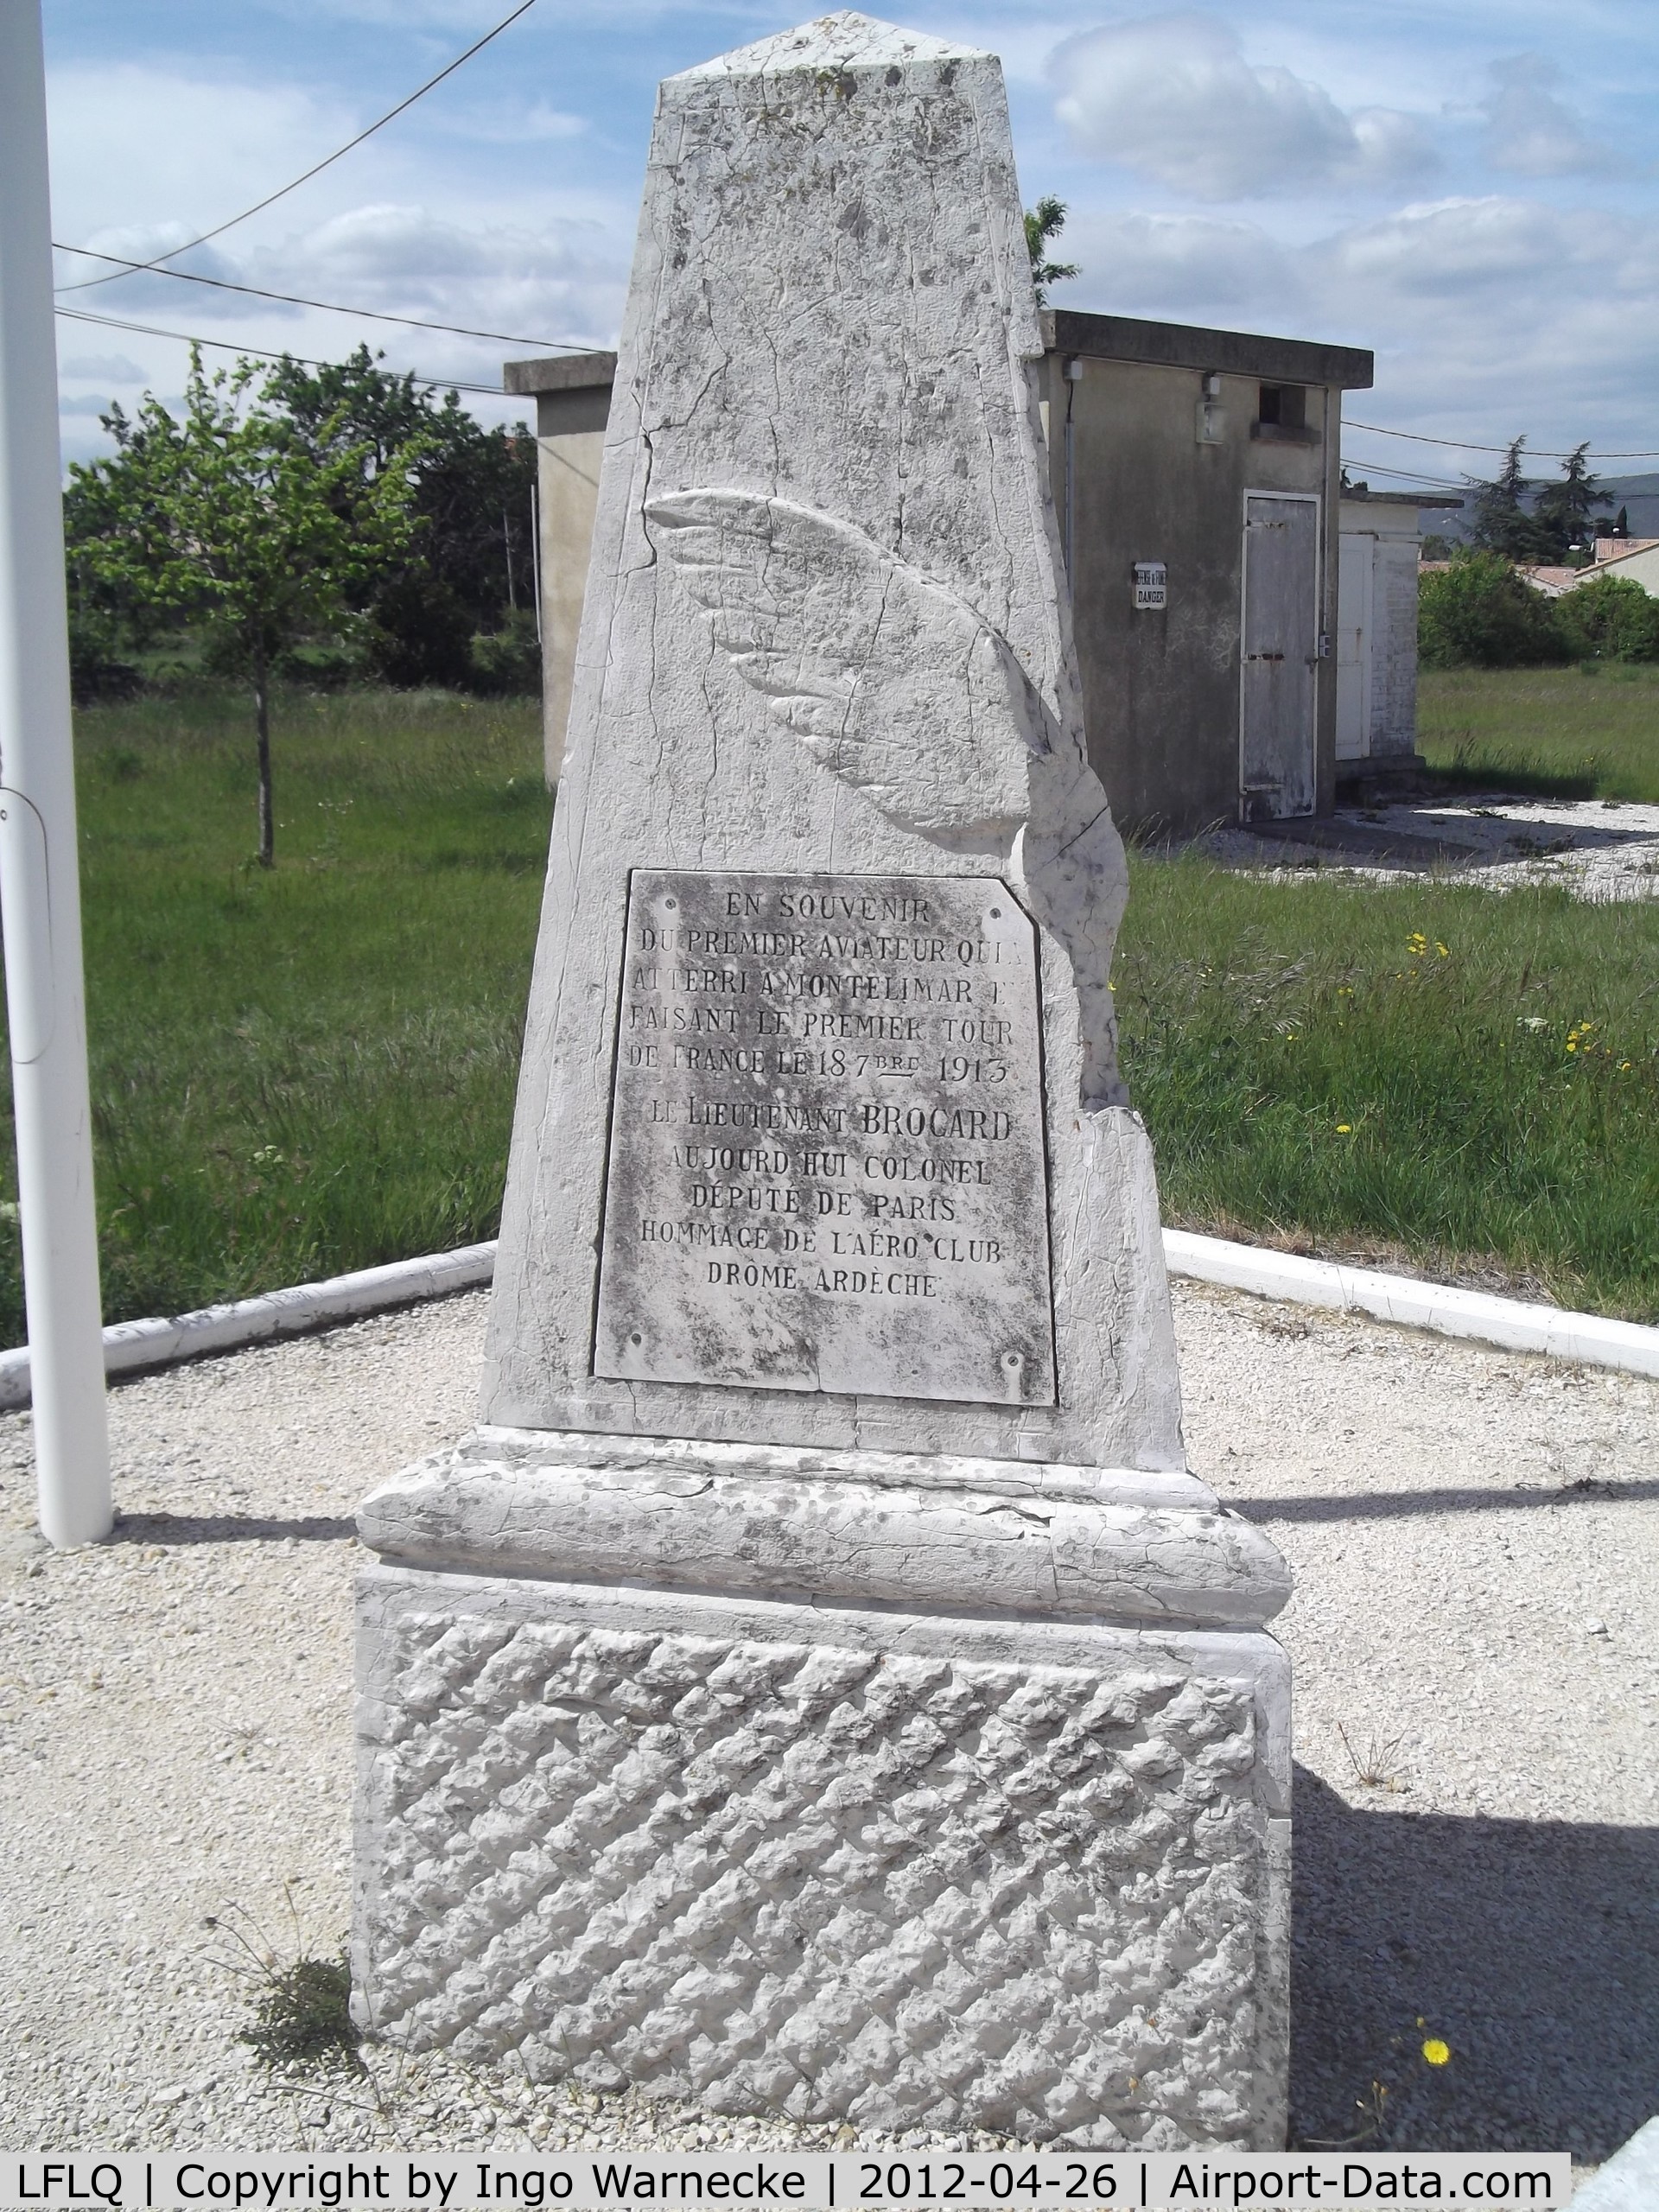 Montélimar Ancone Airport, Montélimar France (LFLQ) - memorial at Montelimar Ancone airfield commemorating: 1. the first flight of Roger Morin im Dptm Drome in May 1911; 2. first flights at the Ecole d'Istres; 3. Tour de France of Antonin Brocard on Deperdussin 1913; 4. founders of the Aeroclub de la Drome